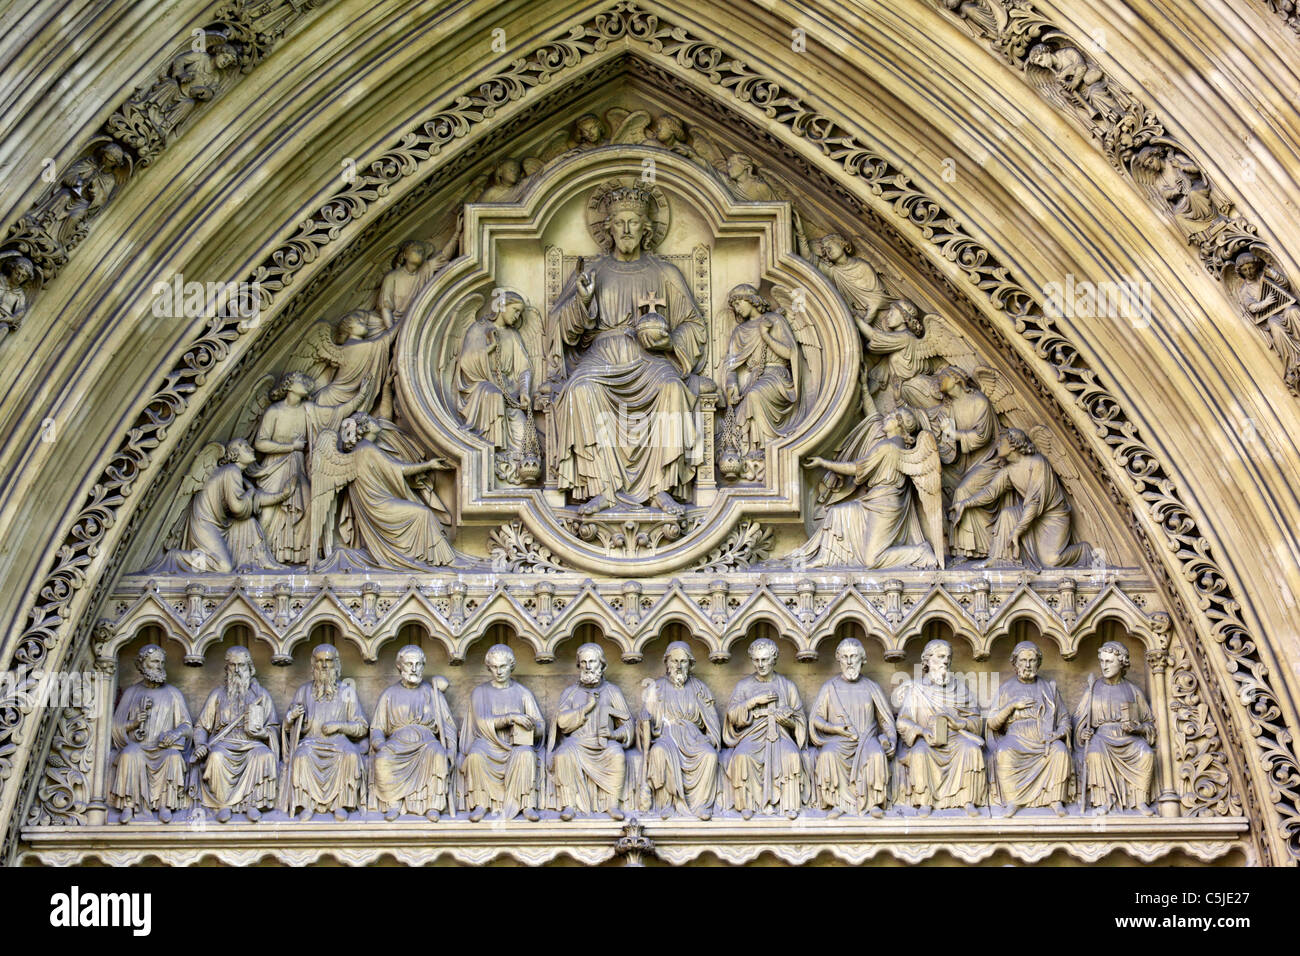 Detail of stone carvings of Jesus, angels and disciples on tympanum of Great North Door, Westminster Abbey, London, England Stock Photo